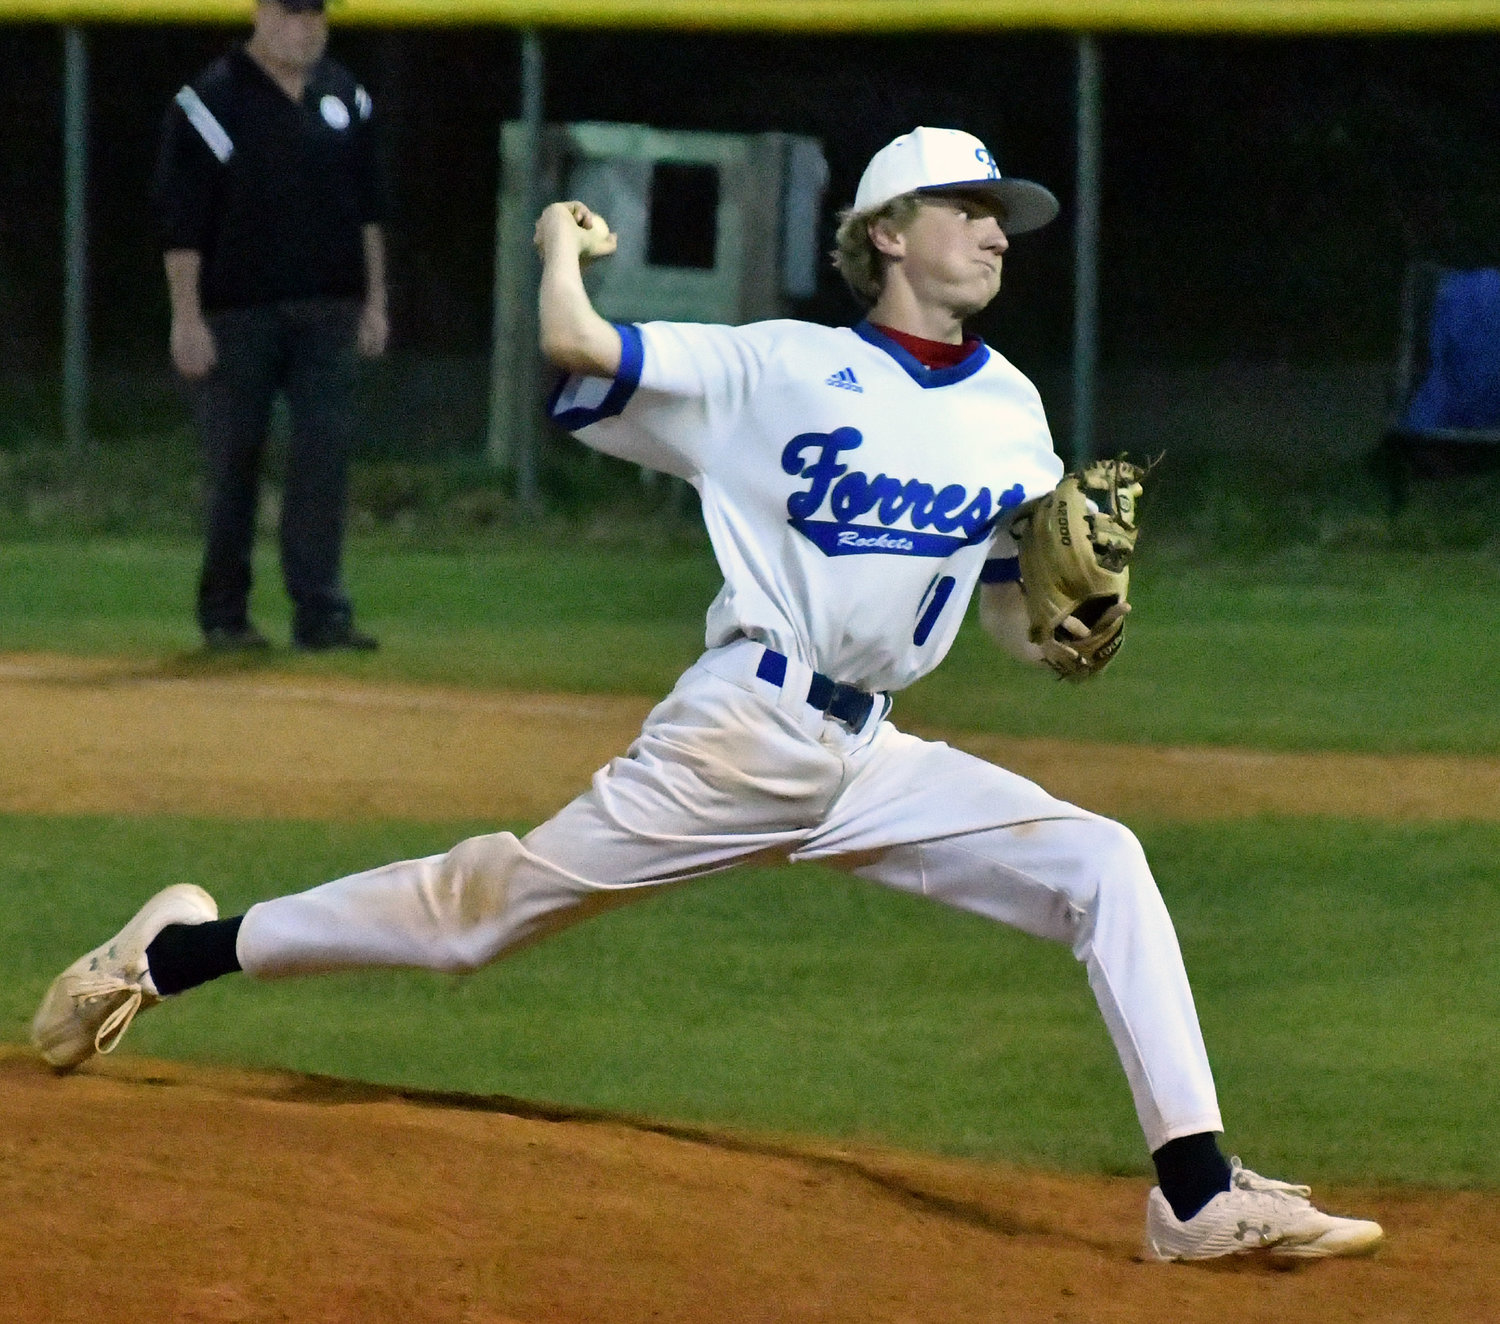 Austin Grubbs pitched in the final three innings to get the save for the Rockets.